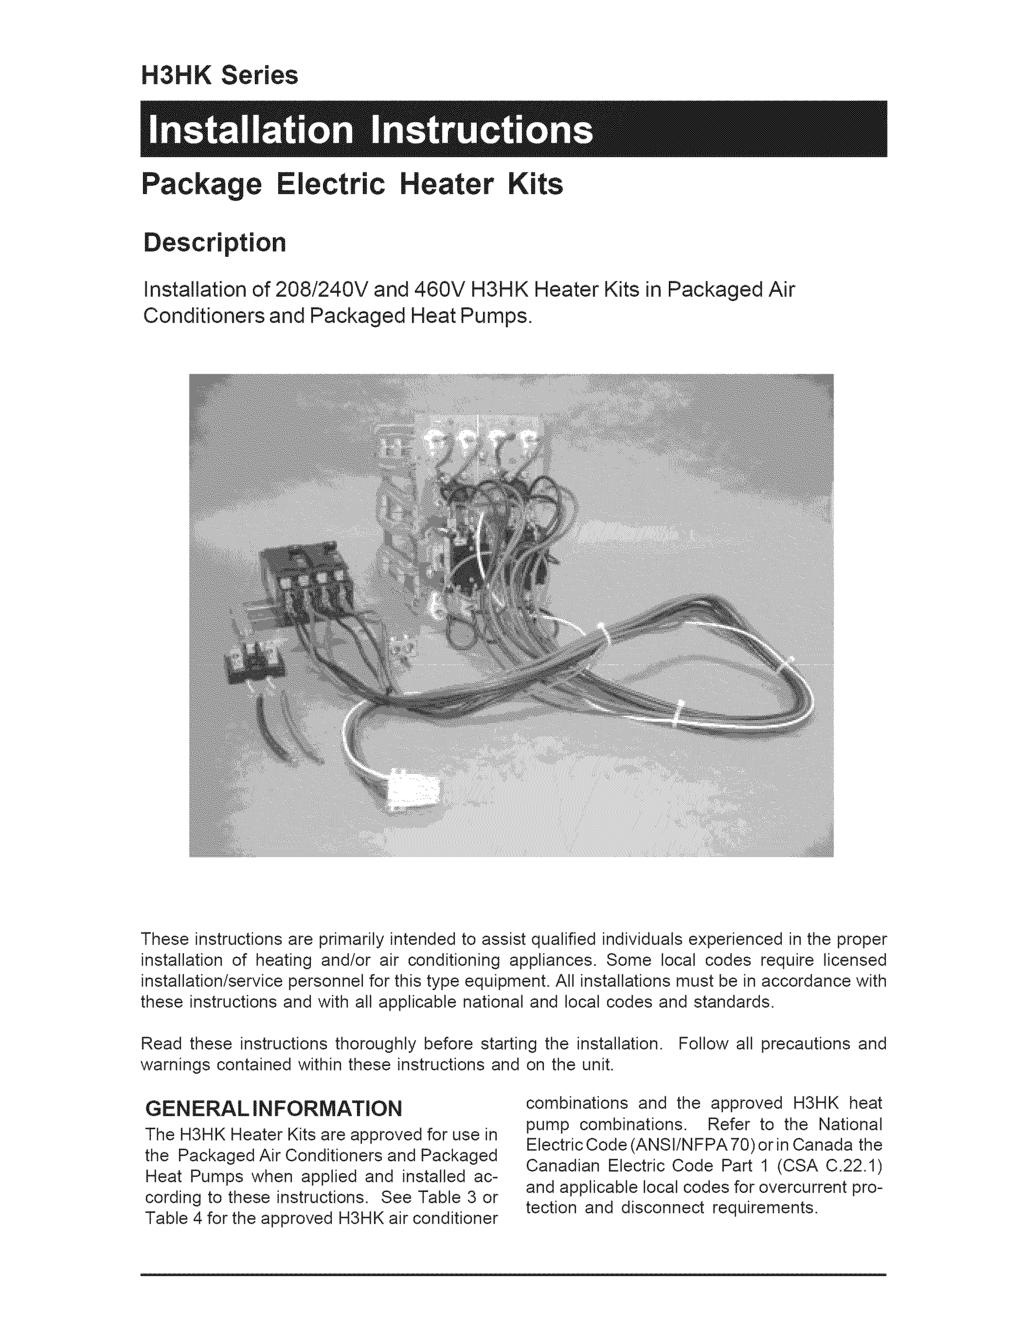 HHK Series Package Electric Heater Kits Description nstallation of 0/40V and 460V HHK Heater Kits in Packaged Air Conditioners and Packaged Heat Pumps.